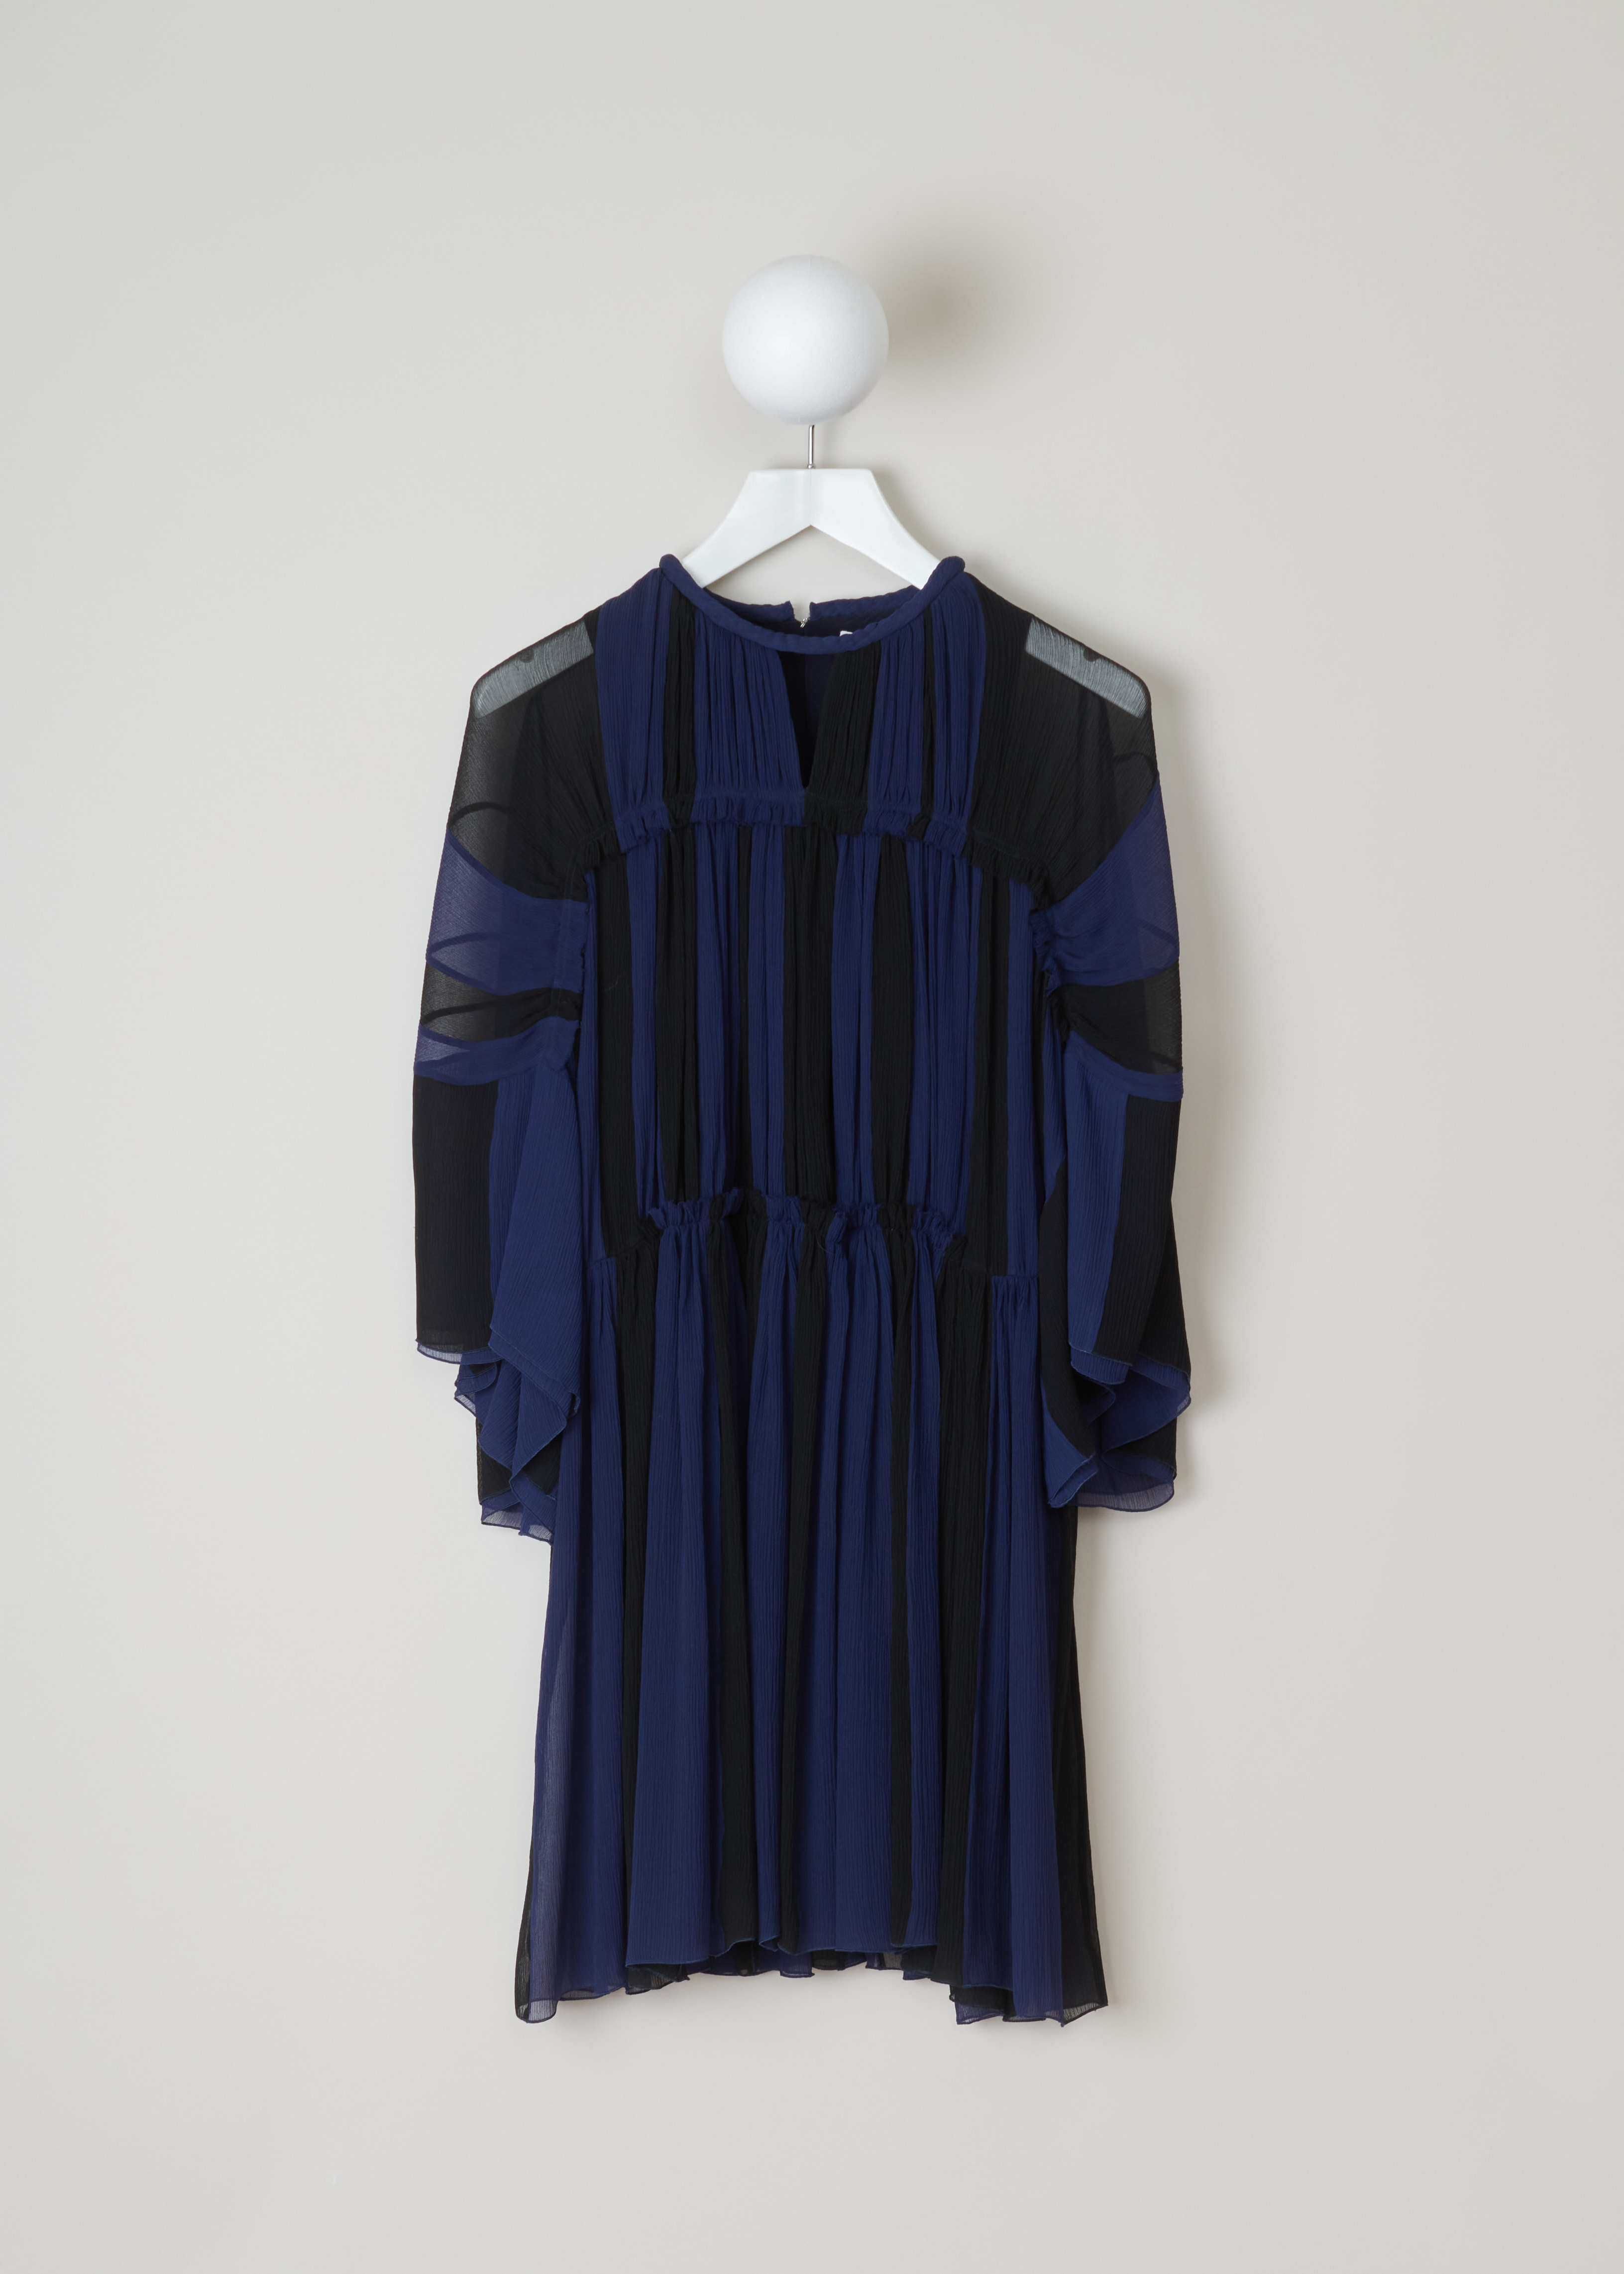 Chloé Gathered slik crepe dress CHC19ARO37006925_925_Black_Blue front. This chic silk crepe dress has a blue and black vertically striped pattern. A gathered round neckline and ruffled sheer long sleeves. A ruffled waist and flared gathered midi skirt. 